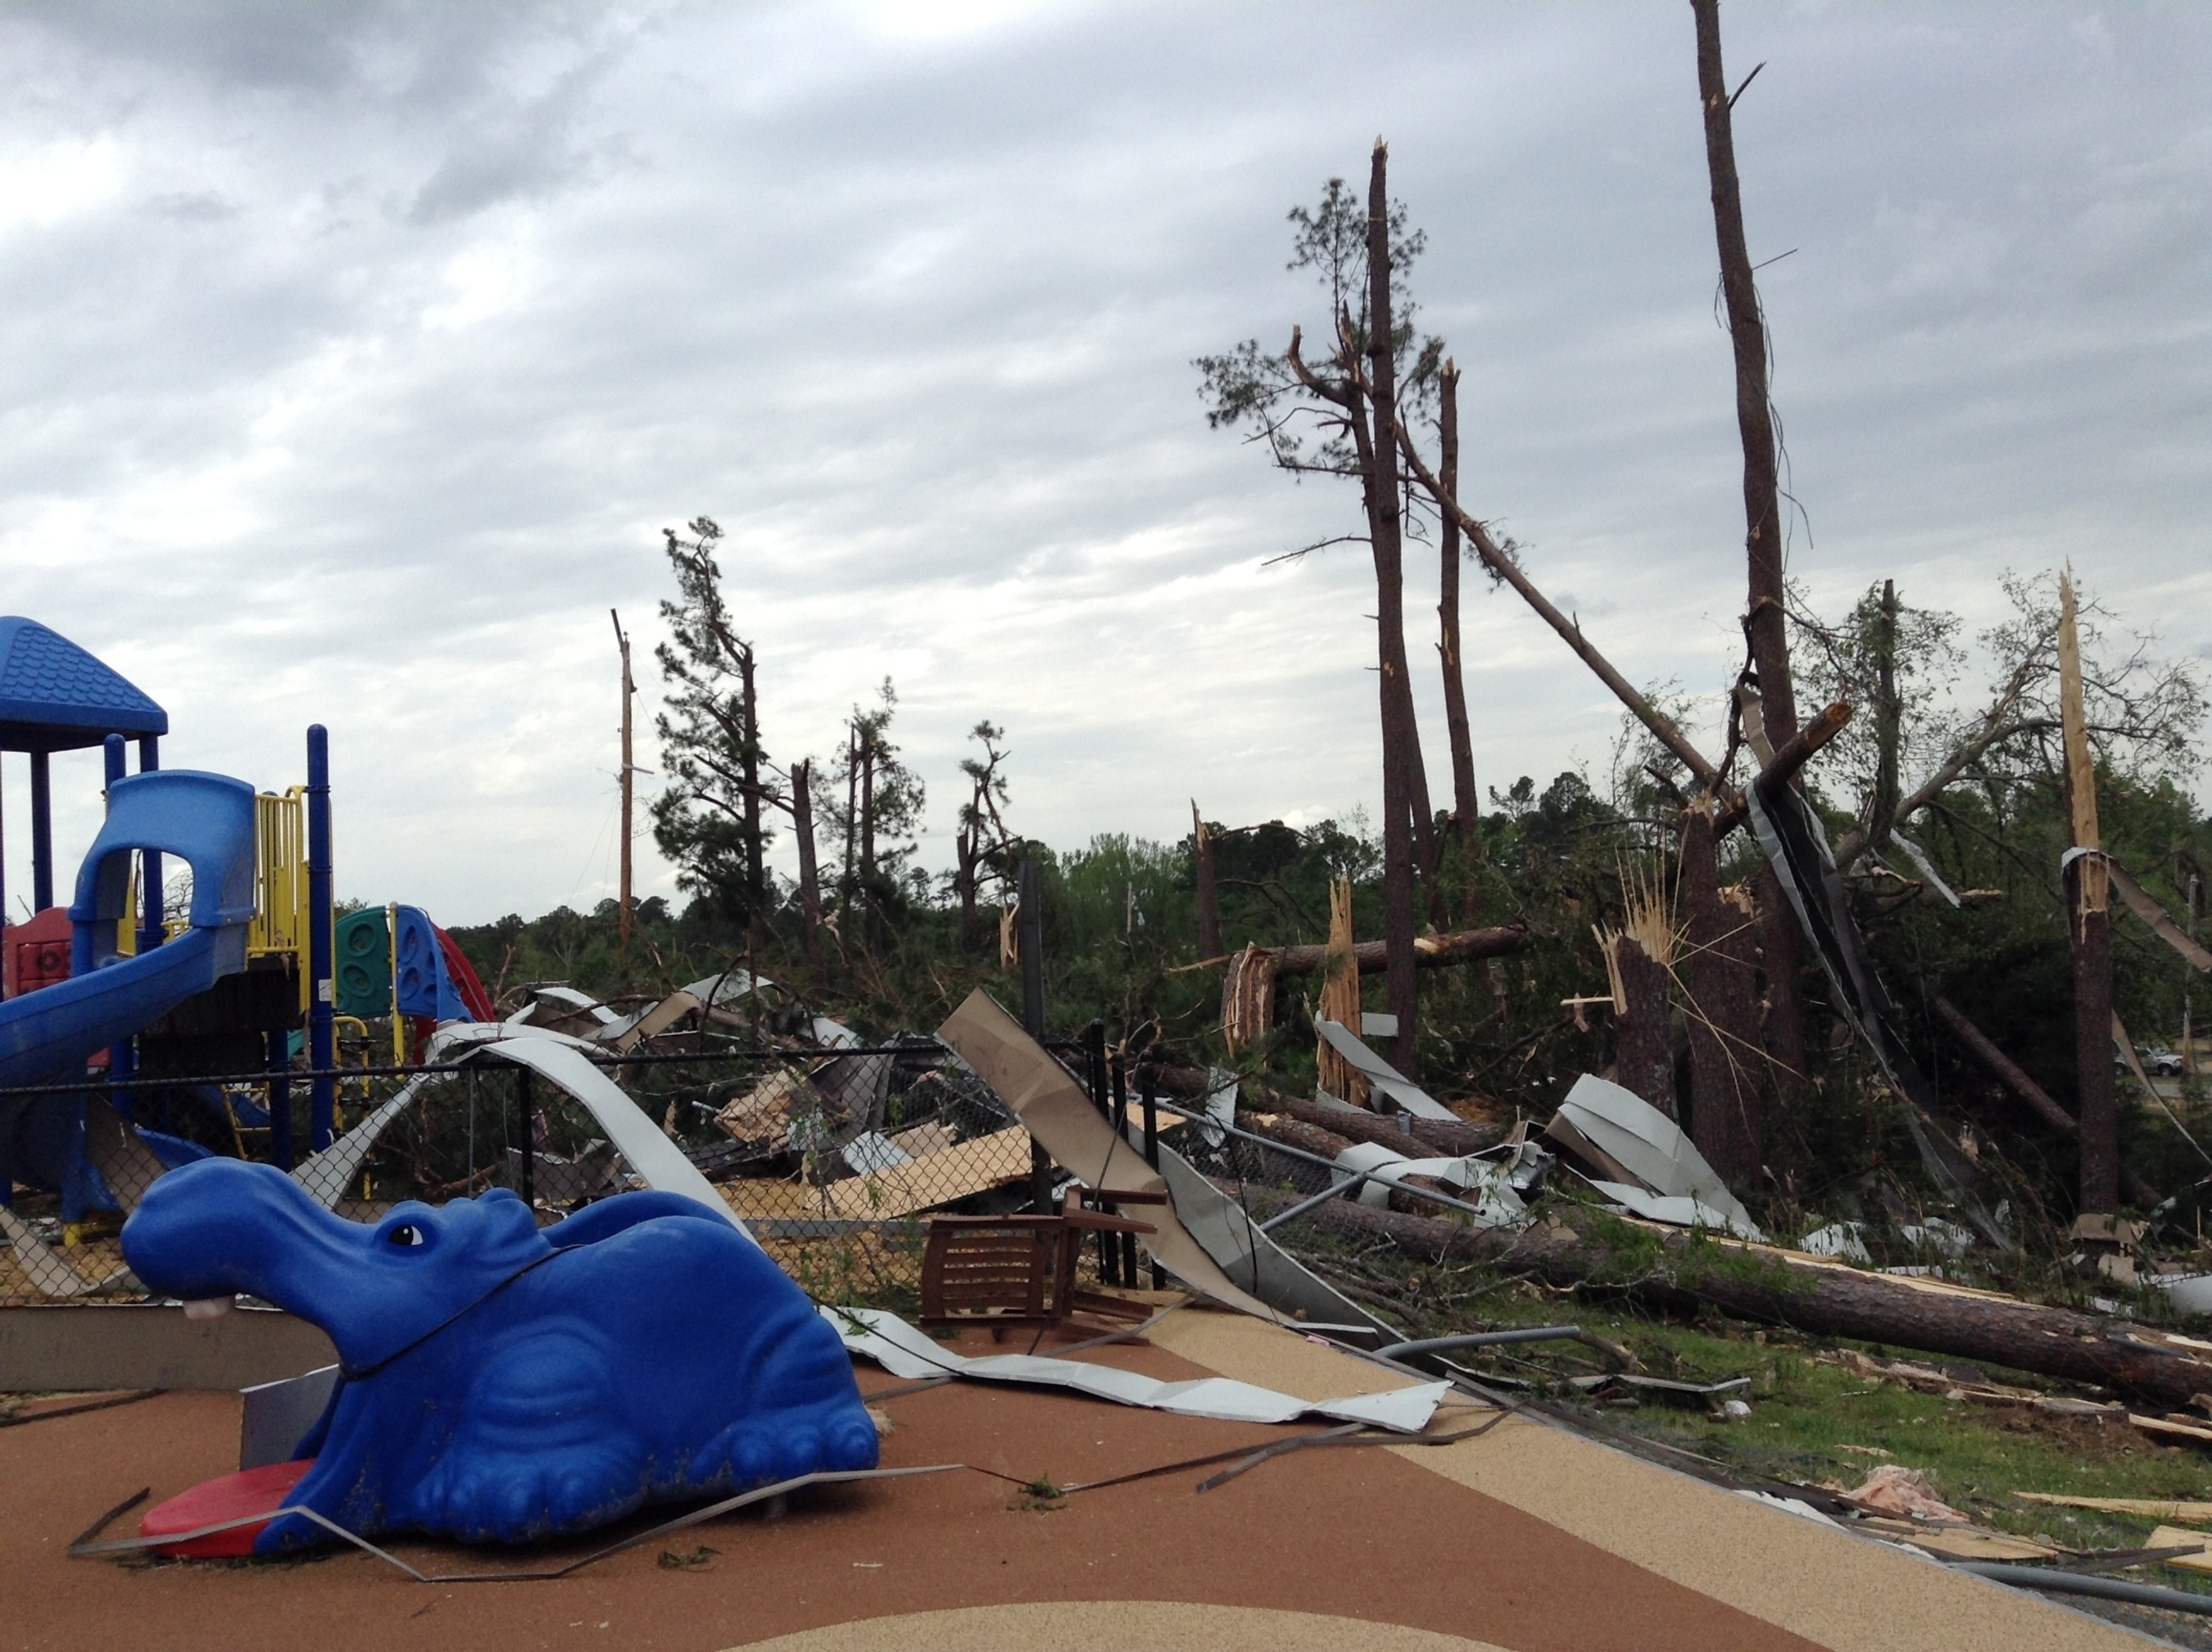 The Small Miracles Preschool and Mother's Day Out Center at St. Luke’s Methodist Church sustained significant damage after a tornado ripped through Tulpelo, Miss. on April 28.  Photo by Sarita Fritzler for Save the Children. (PRNewsFoto/Save the Children)